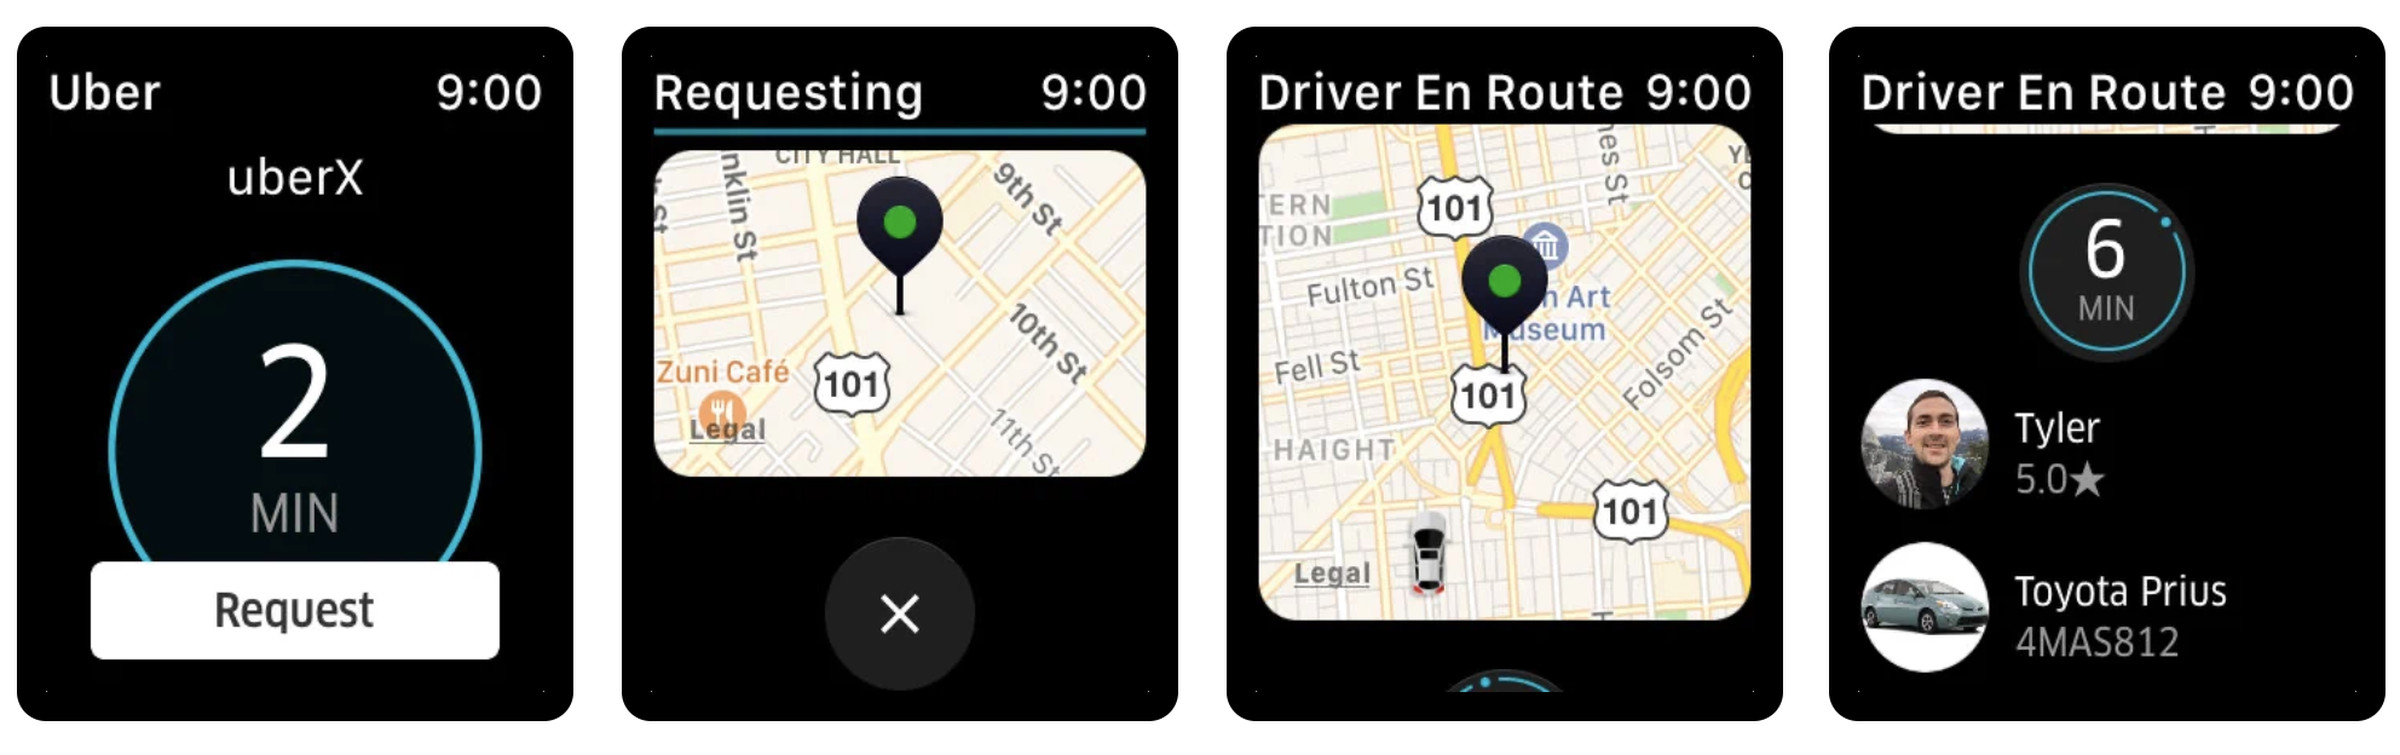 Uber’s Apple Watch app offered basic ride-hailing functionality.